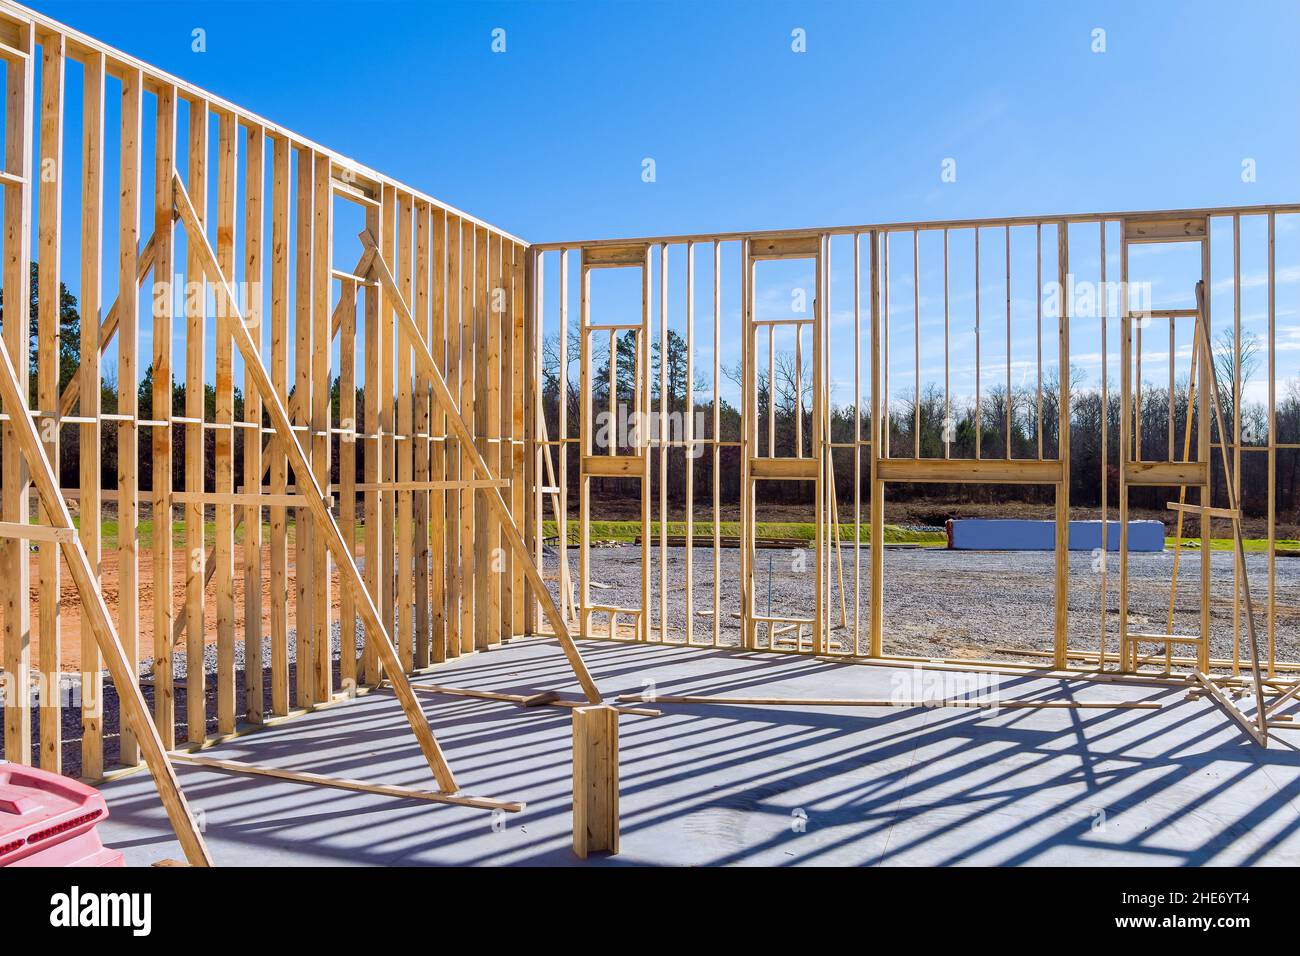 Fragment of a new home under construction wood framing beams Stock Photo